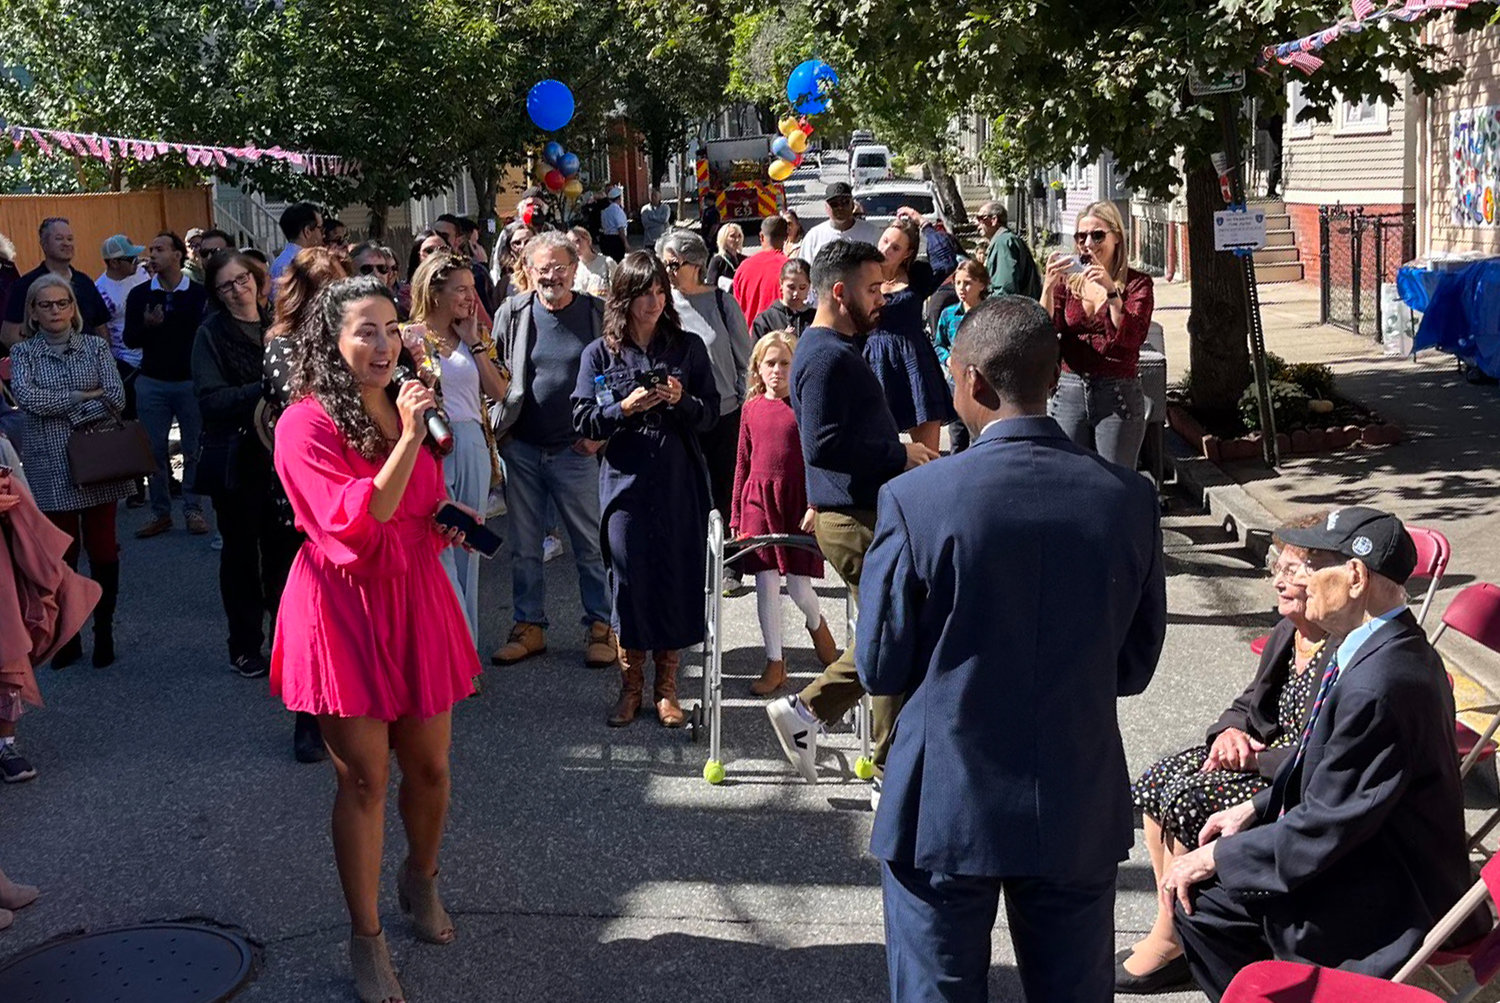 Fox Point neighbors celebrated Pedroso Way, an honorary street designation for Manuel Pedroso, owner of Friends Market and pillar of the community